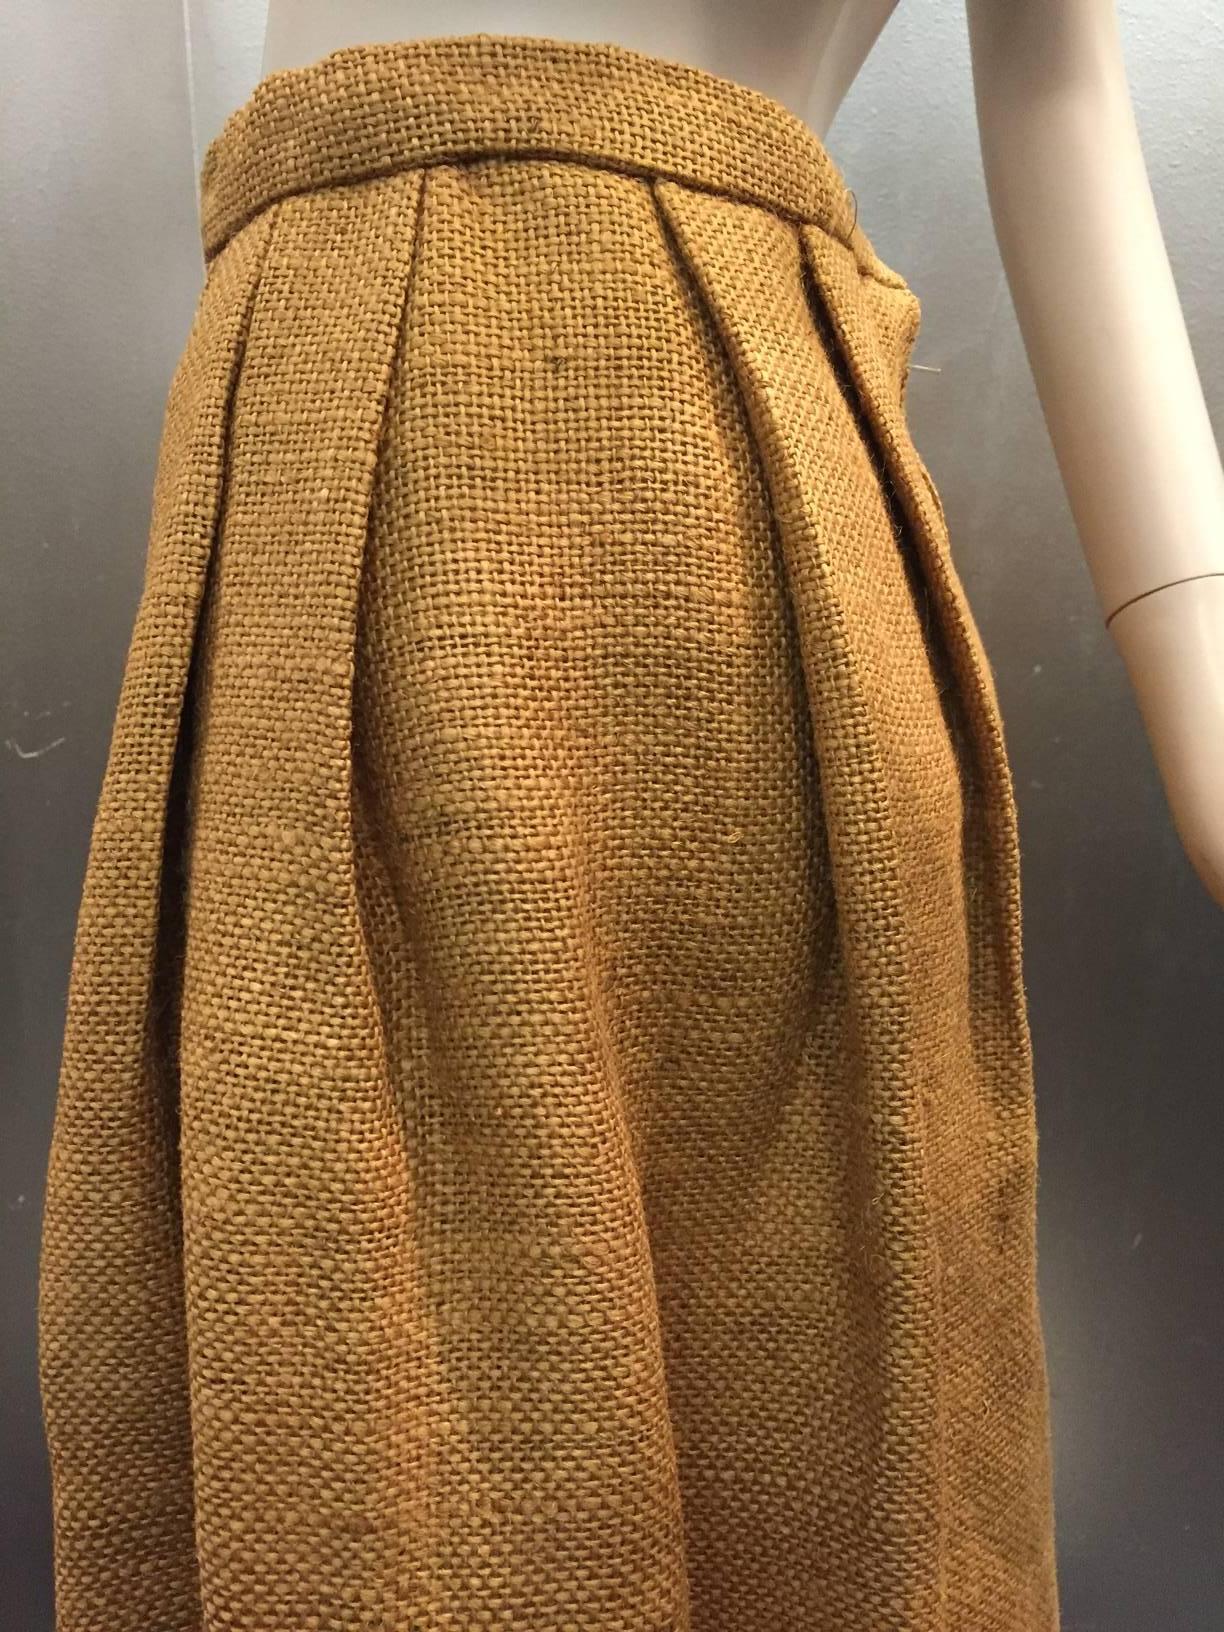 1960s Italian burlap pleated and fringed skirt with hand-painted mushroom detail. Zippered Back, hook and eye closure on banded waist. 